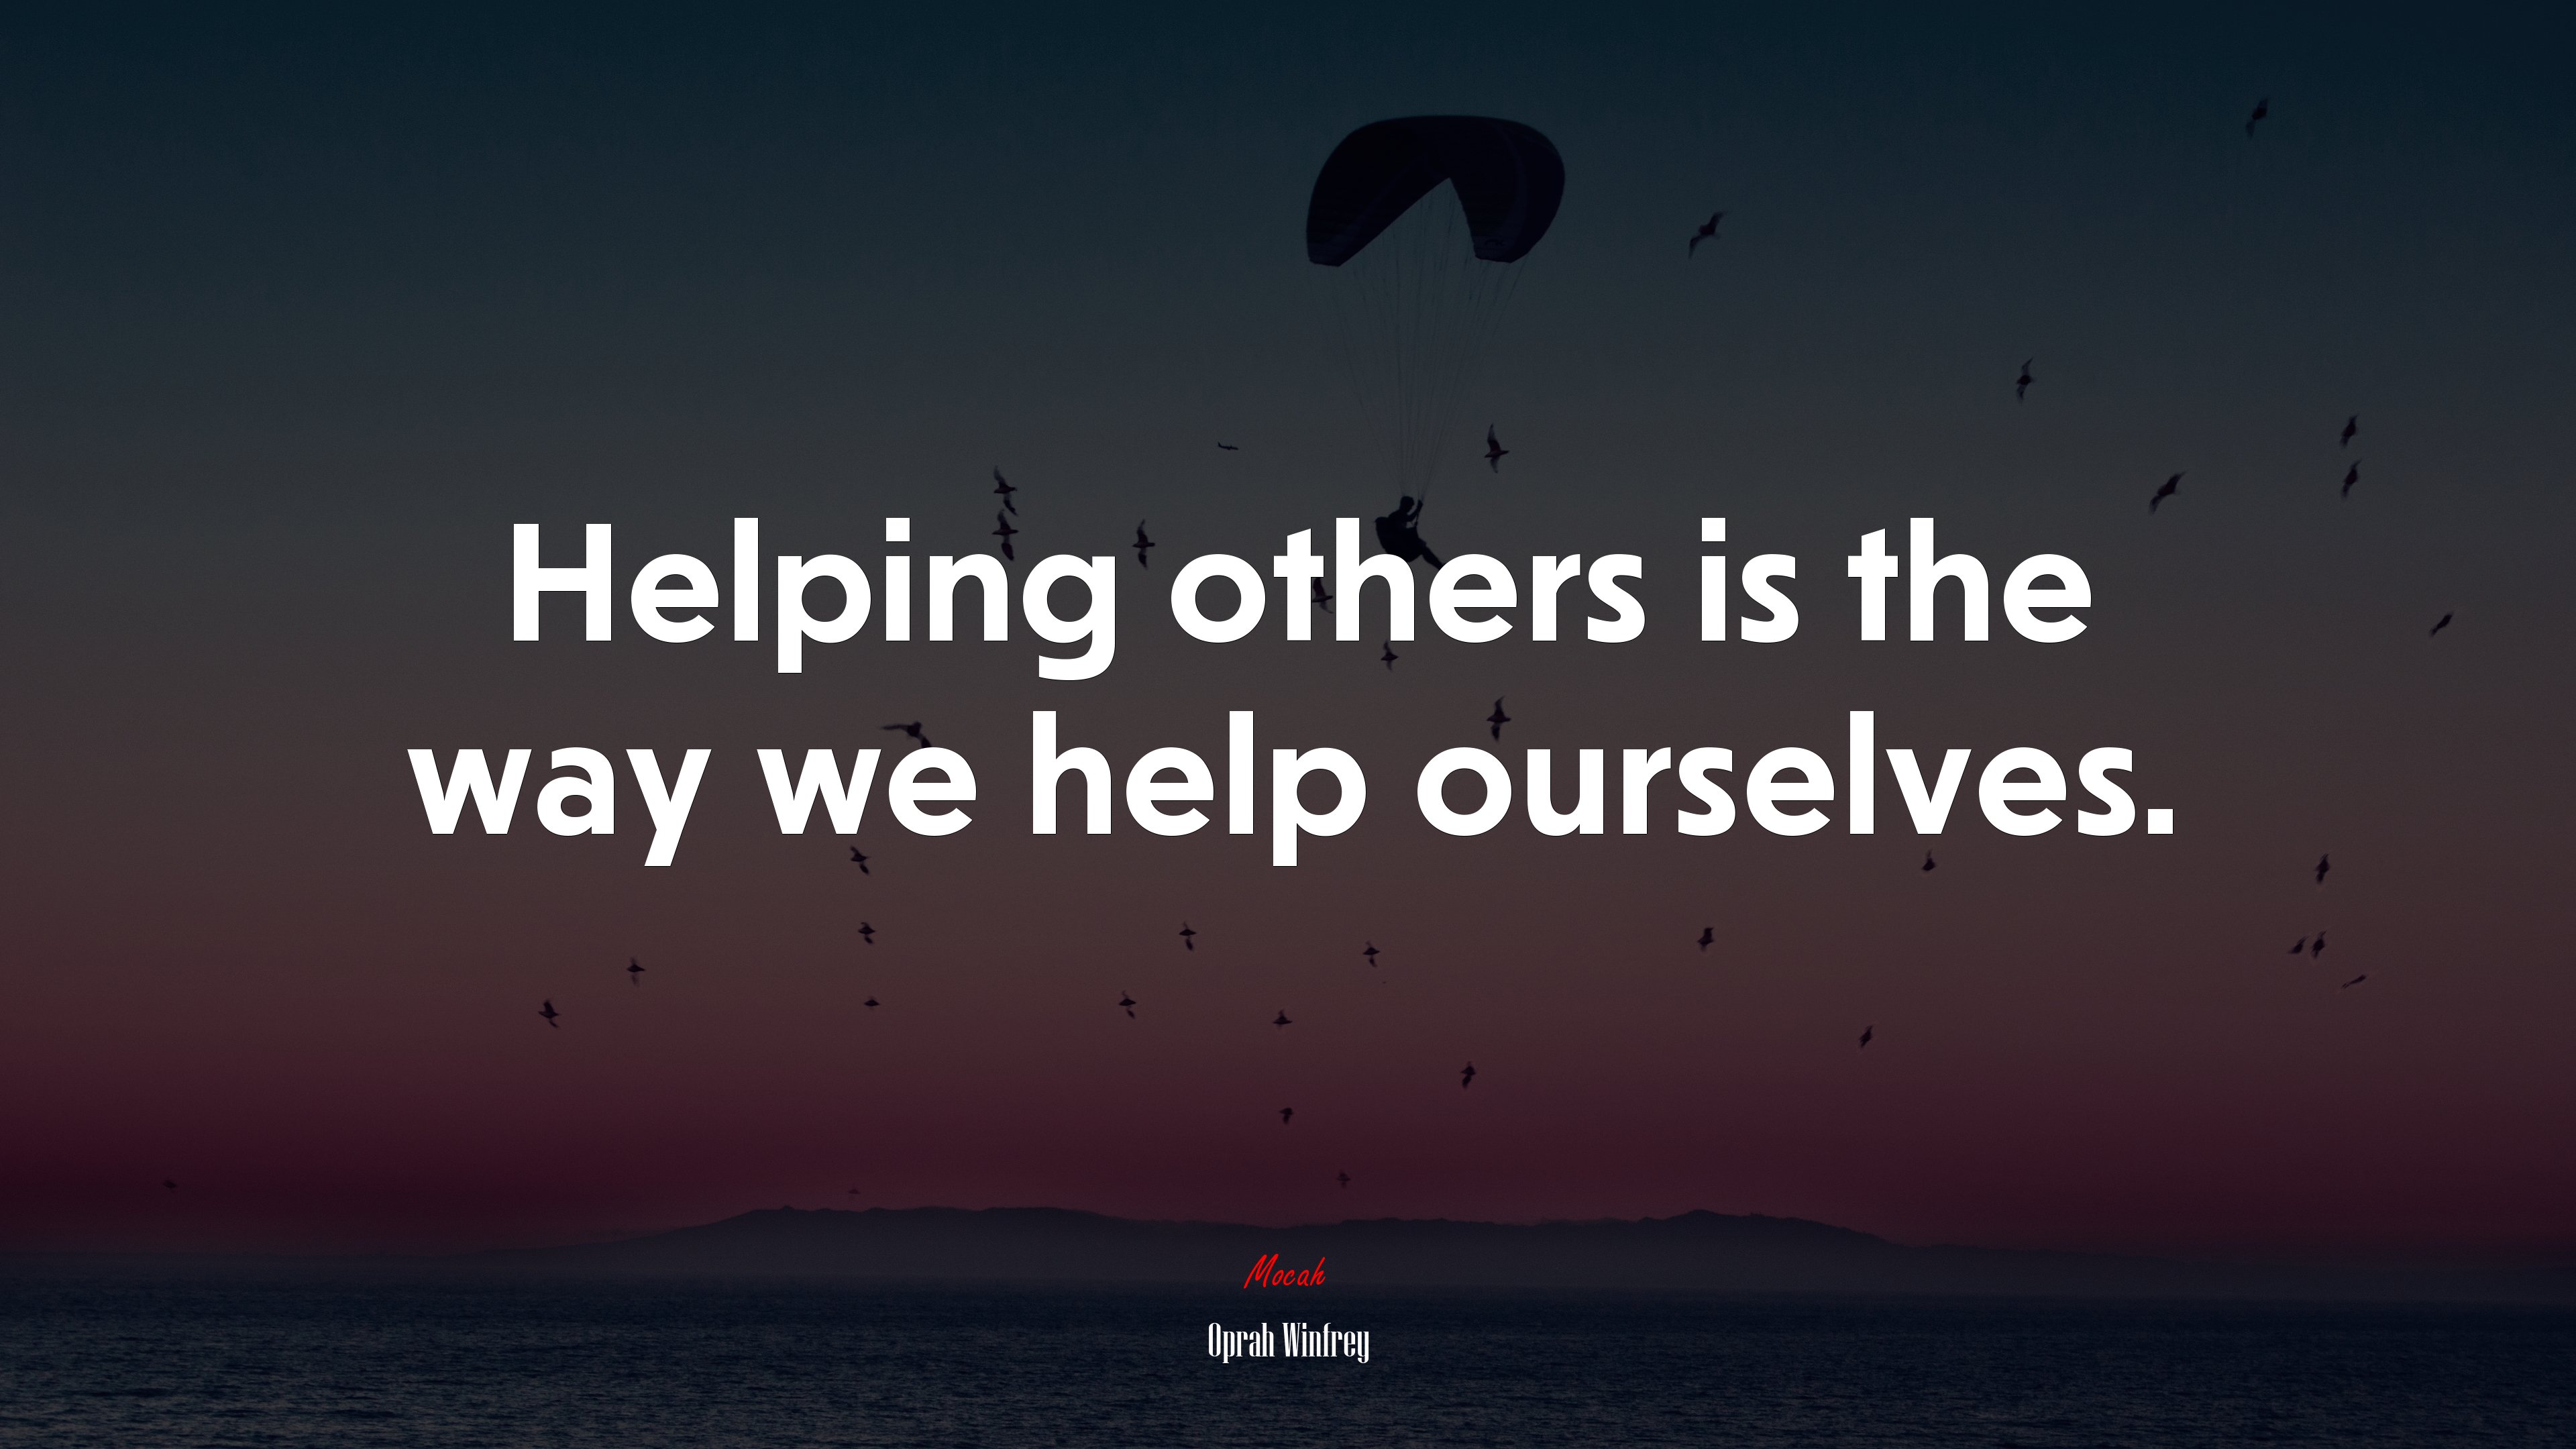 Helping others is the way we help ourselves. Oprah Winfrey quote Gallery HD Wallpaper